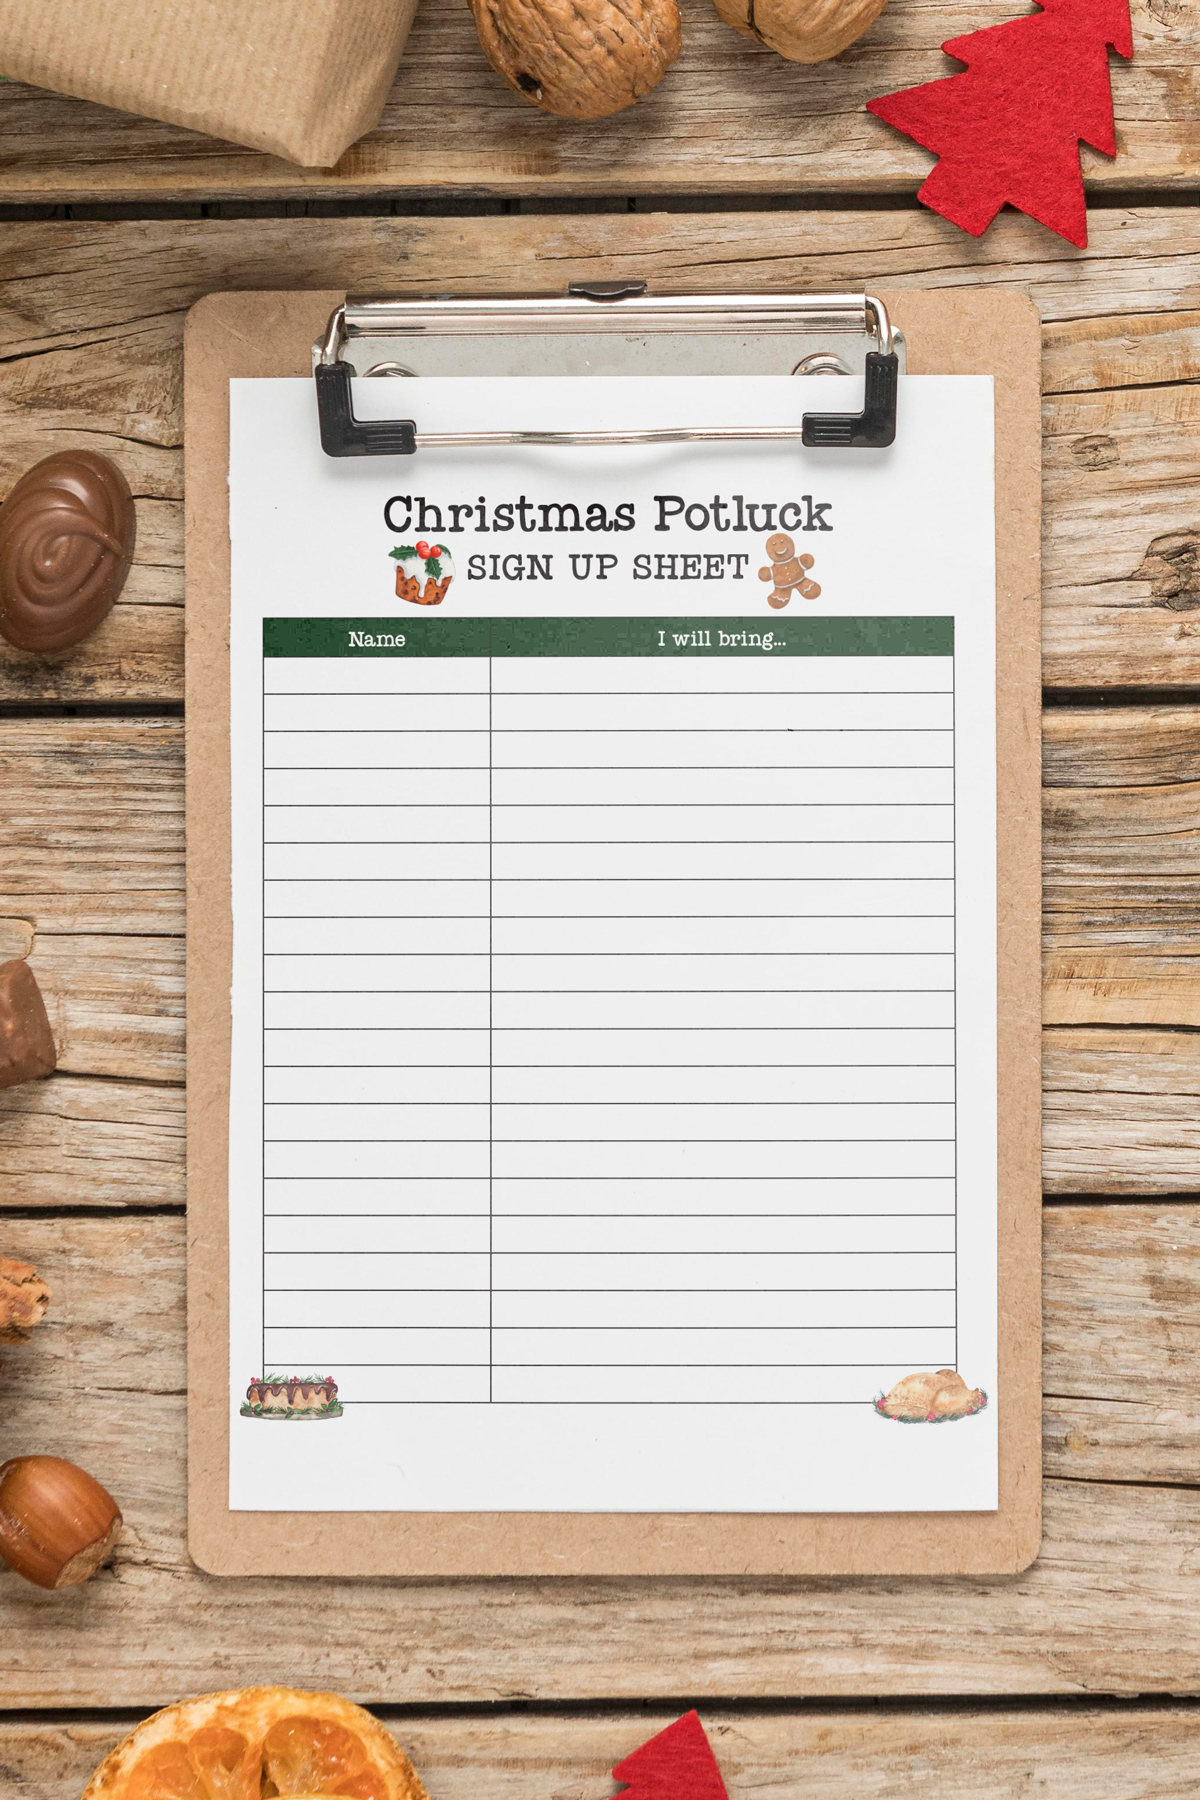 This image shows one of the Christmas potluck sign up sheet free printable options that you can get at the end of this blog post.